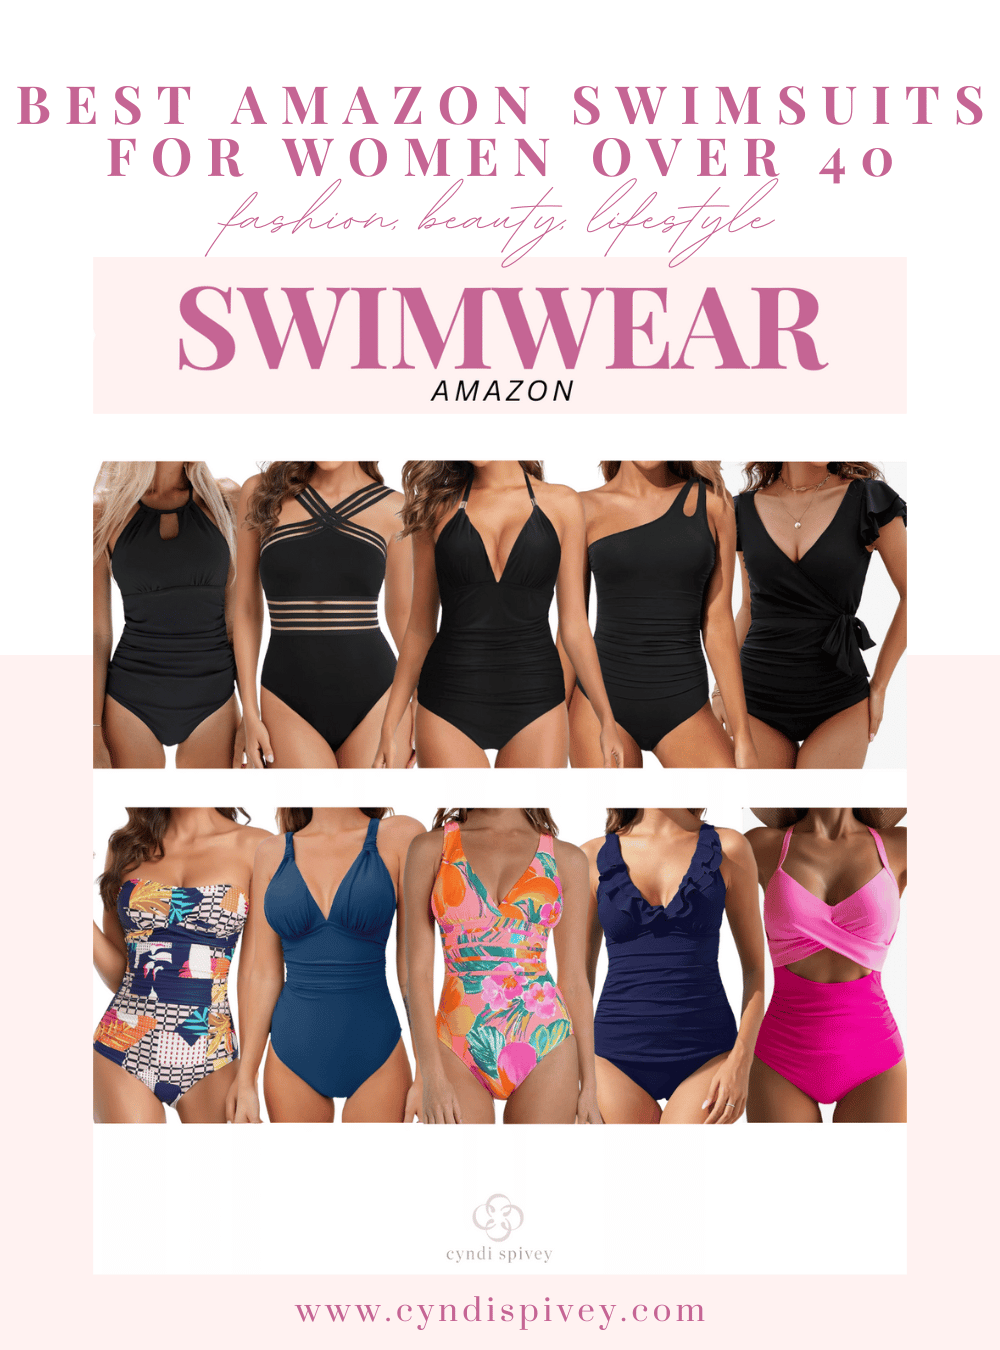 best amazon swimsuits for women over 40, pin for later, pin this post for later, save to Pinterest, save for later